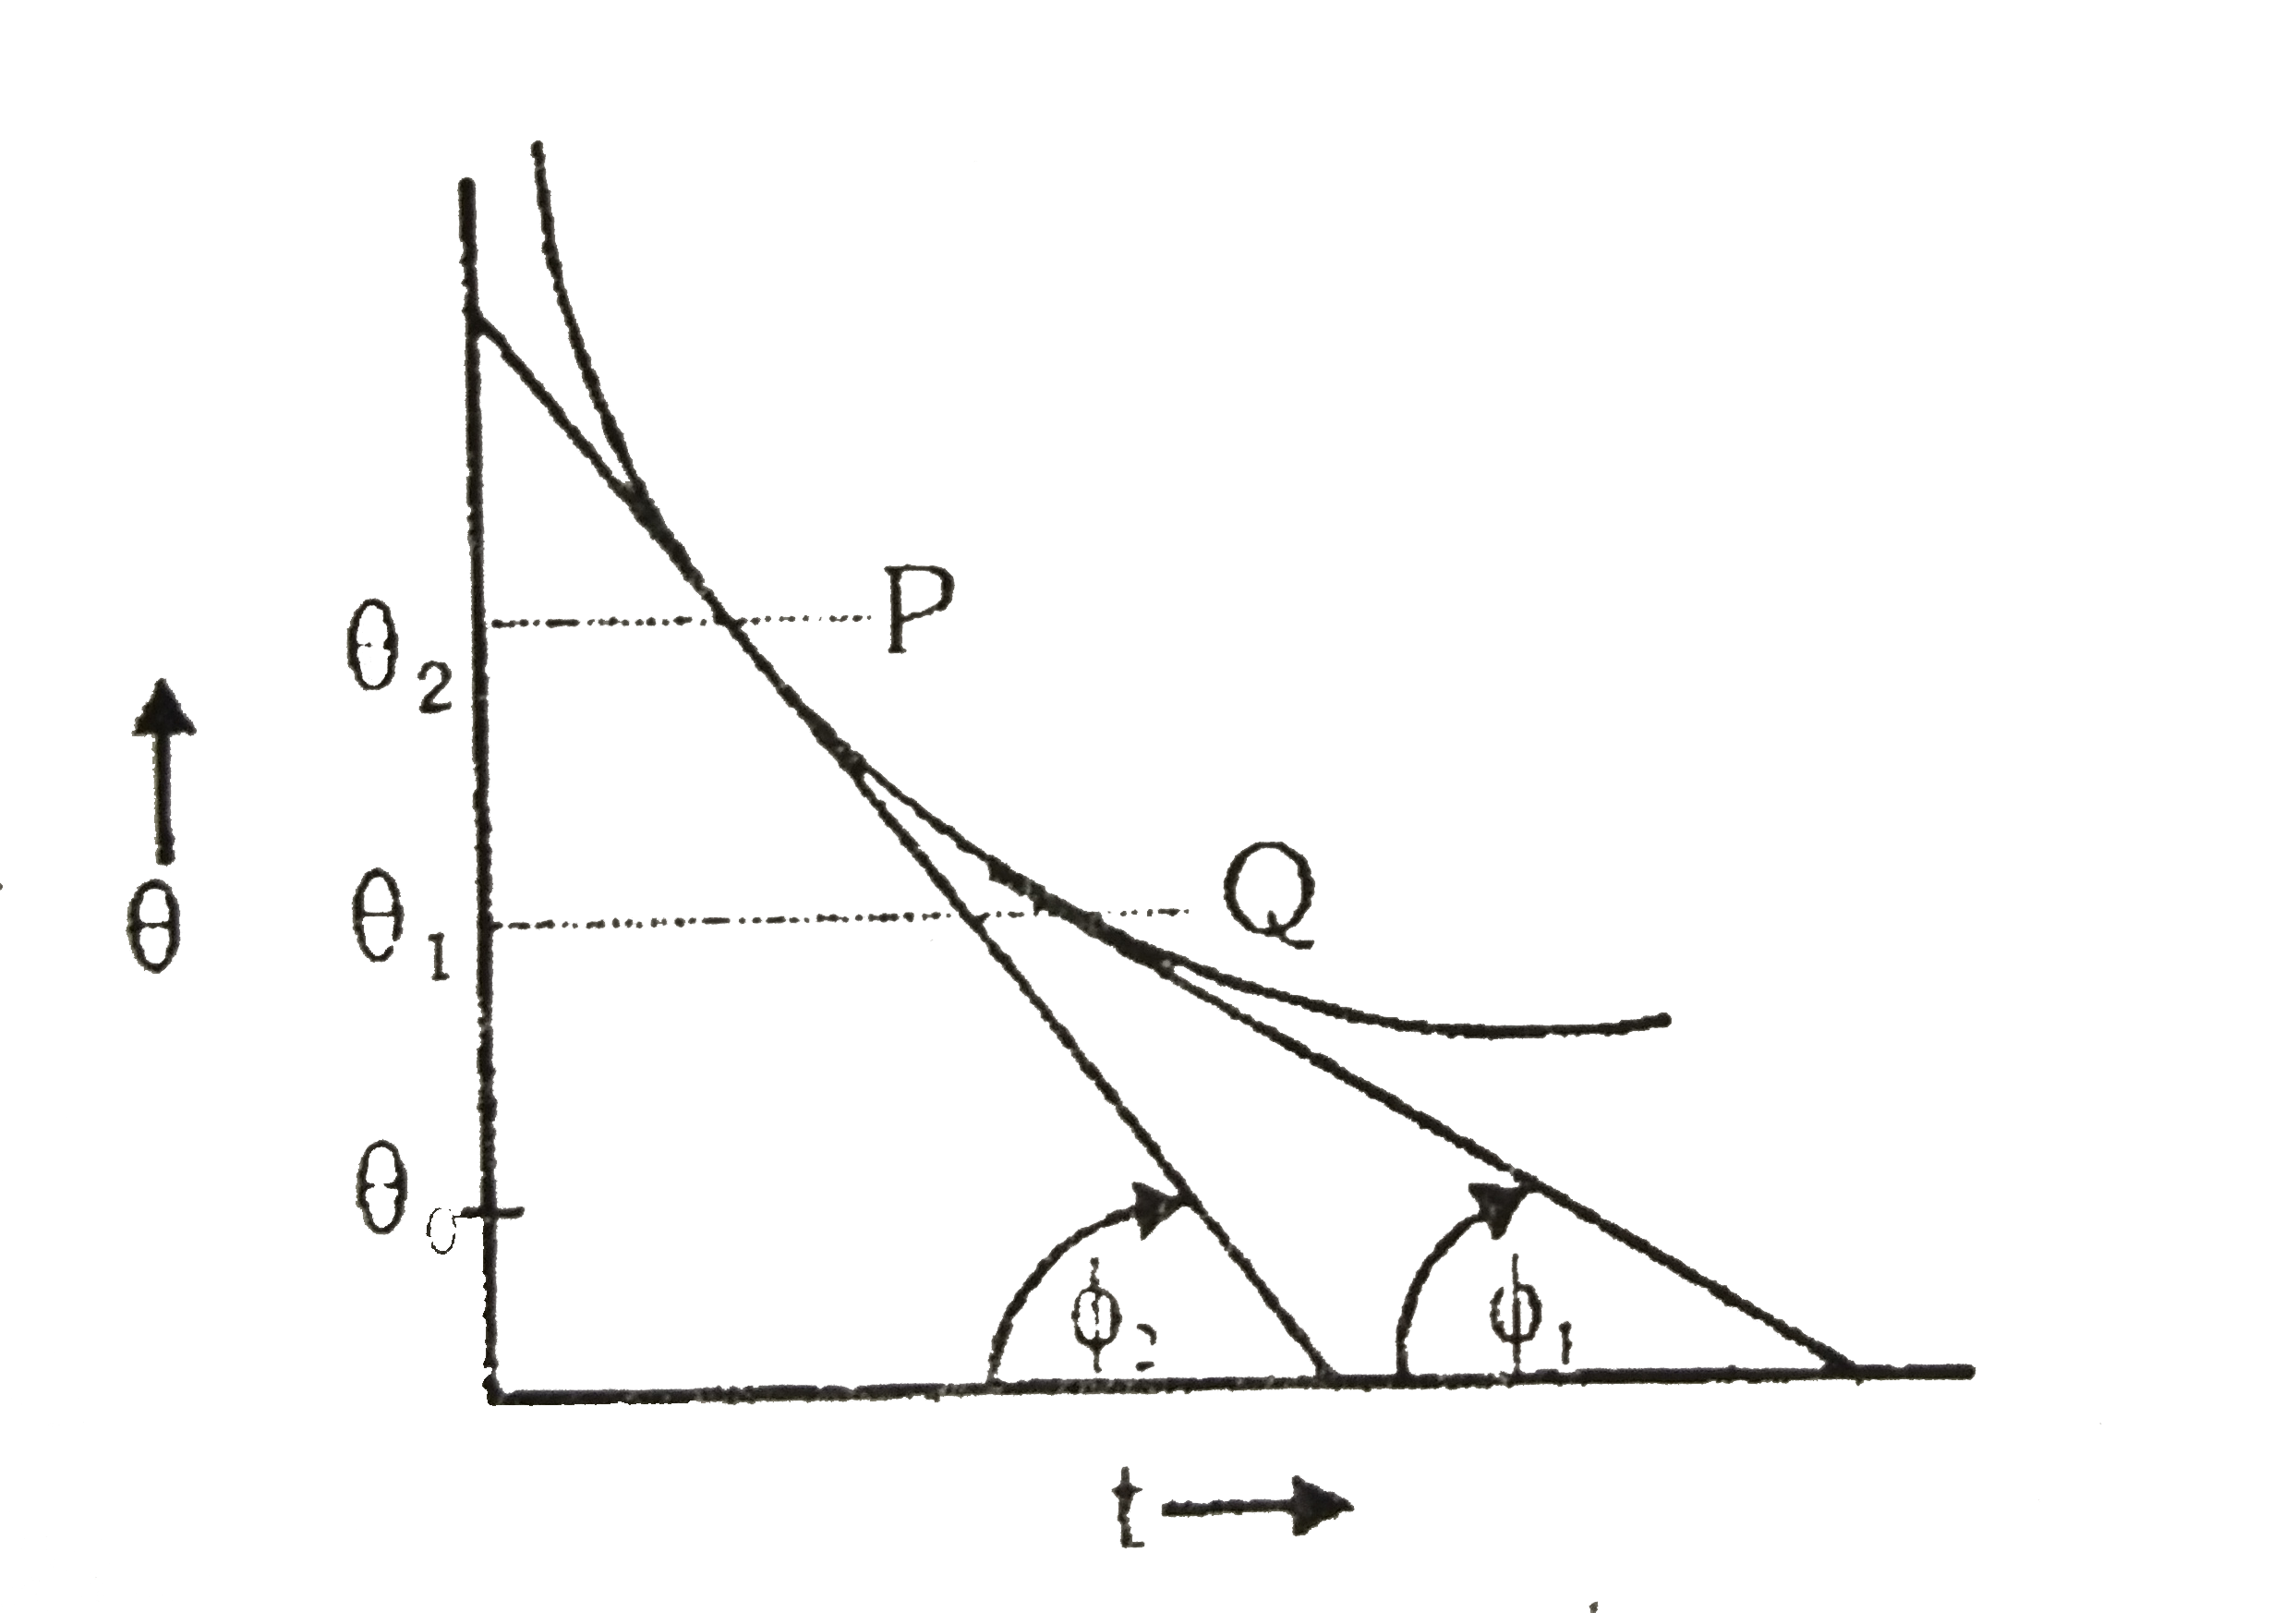 A body cools in a surrounding which is at a constant temperature of theta(0). Assume that it obeys Newton's law of cooling. Its temperature theta is plotted against time t. Tangent are drawn to the curve at the points P(theta= theta(2)) and Q(theta = theta(1)). These tangents meet the time axis at angles of phi(2) and phi(1) as shown , then :-